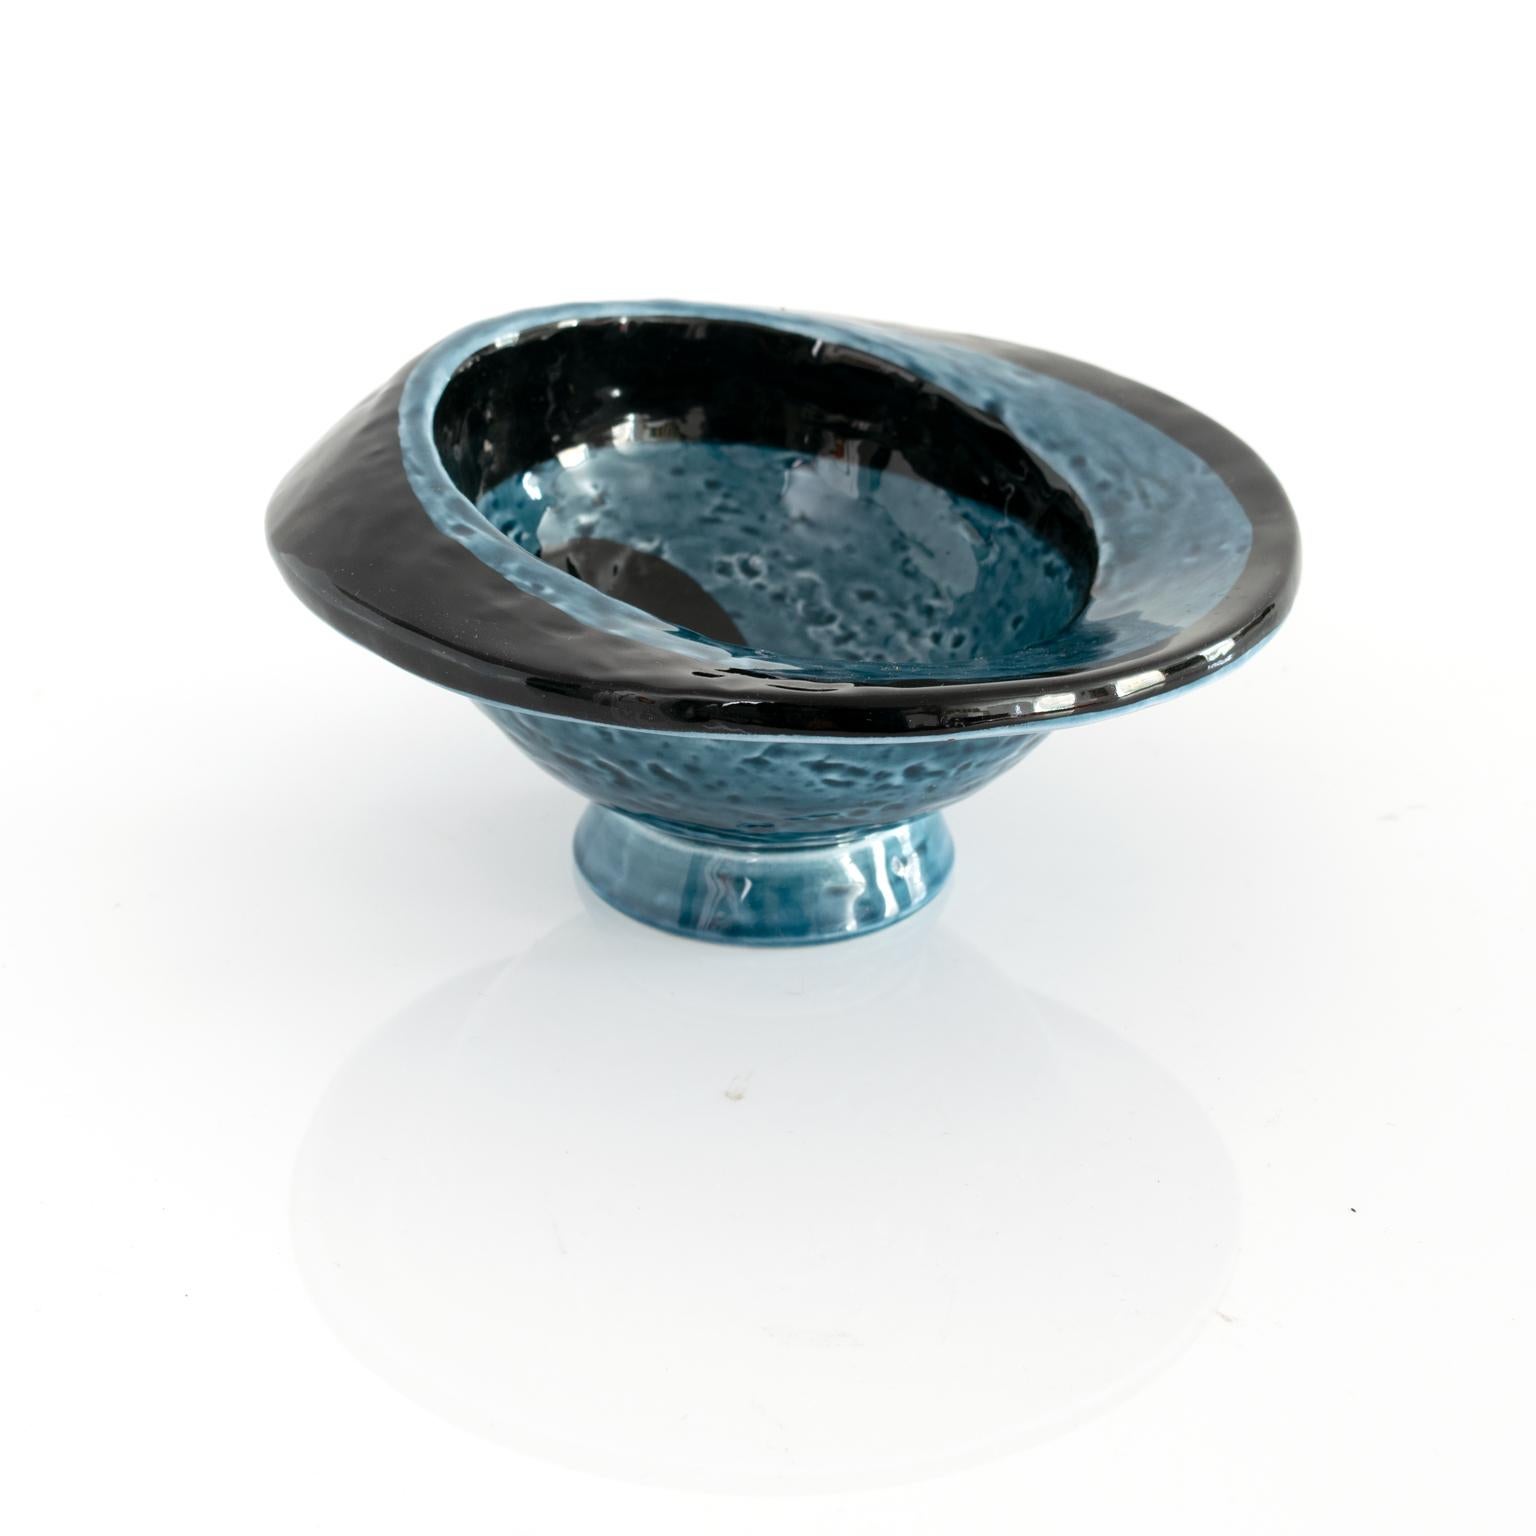 Hand-Painted Vilhelm Bjerke Petersen Small Blue and Black Glazed Surrealist Bowl Rorstrand For Sale